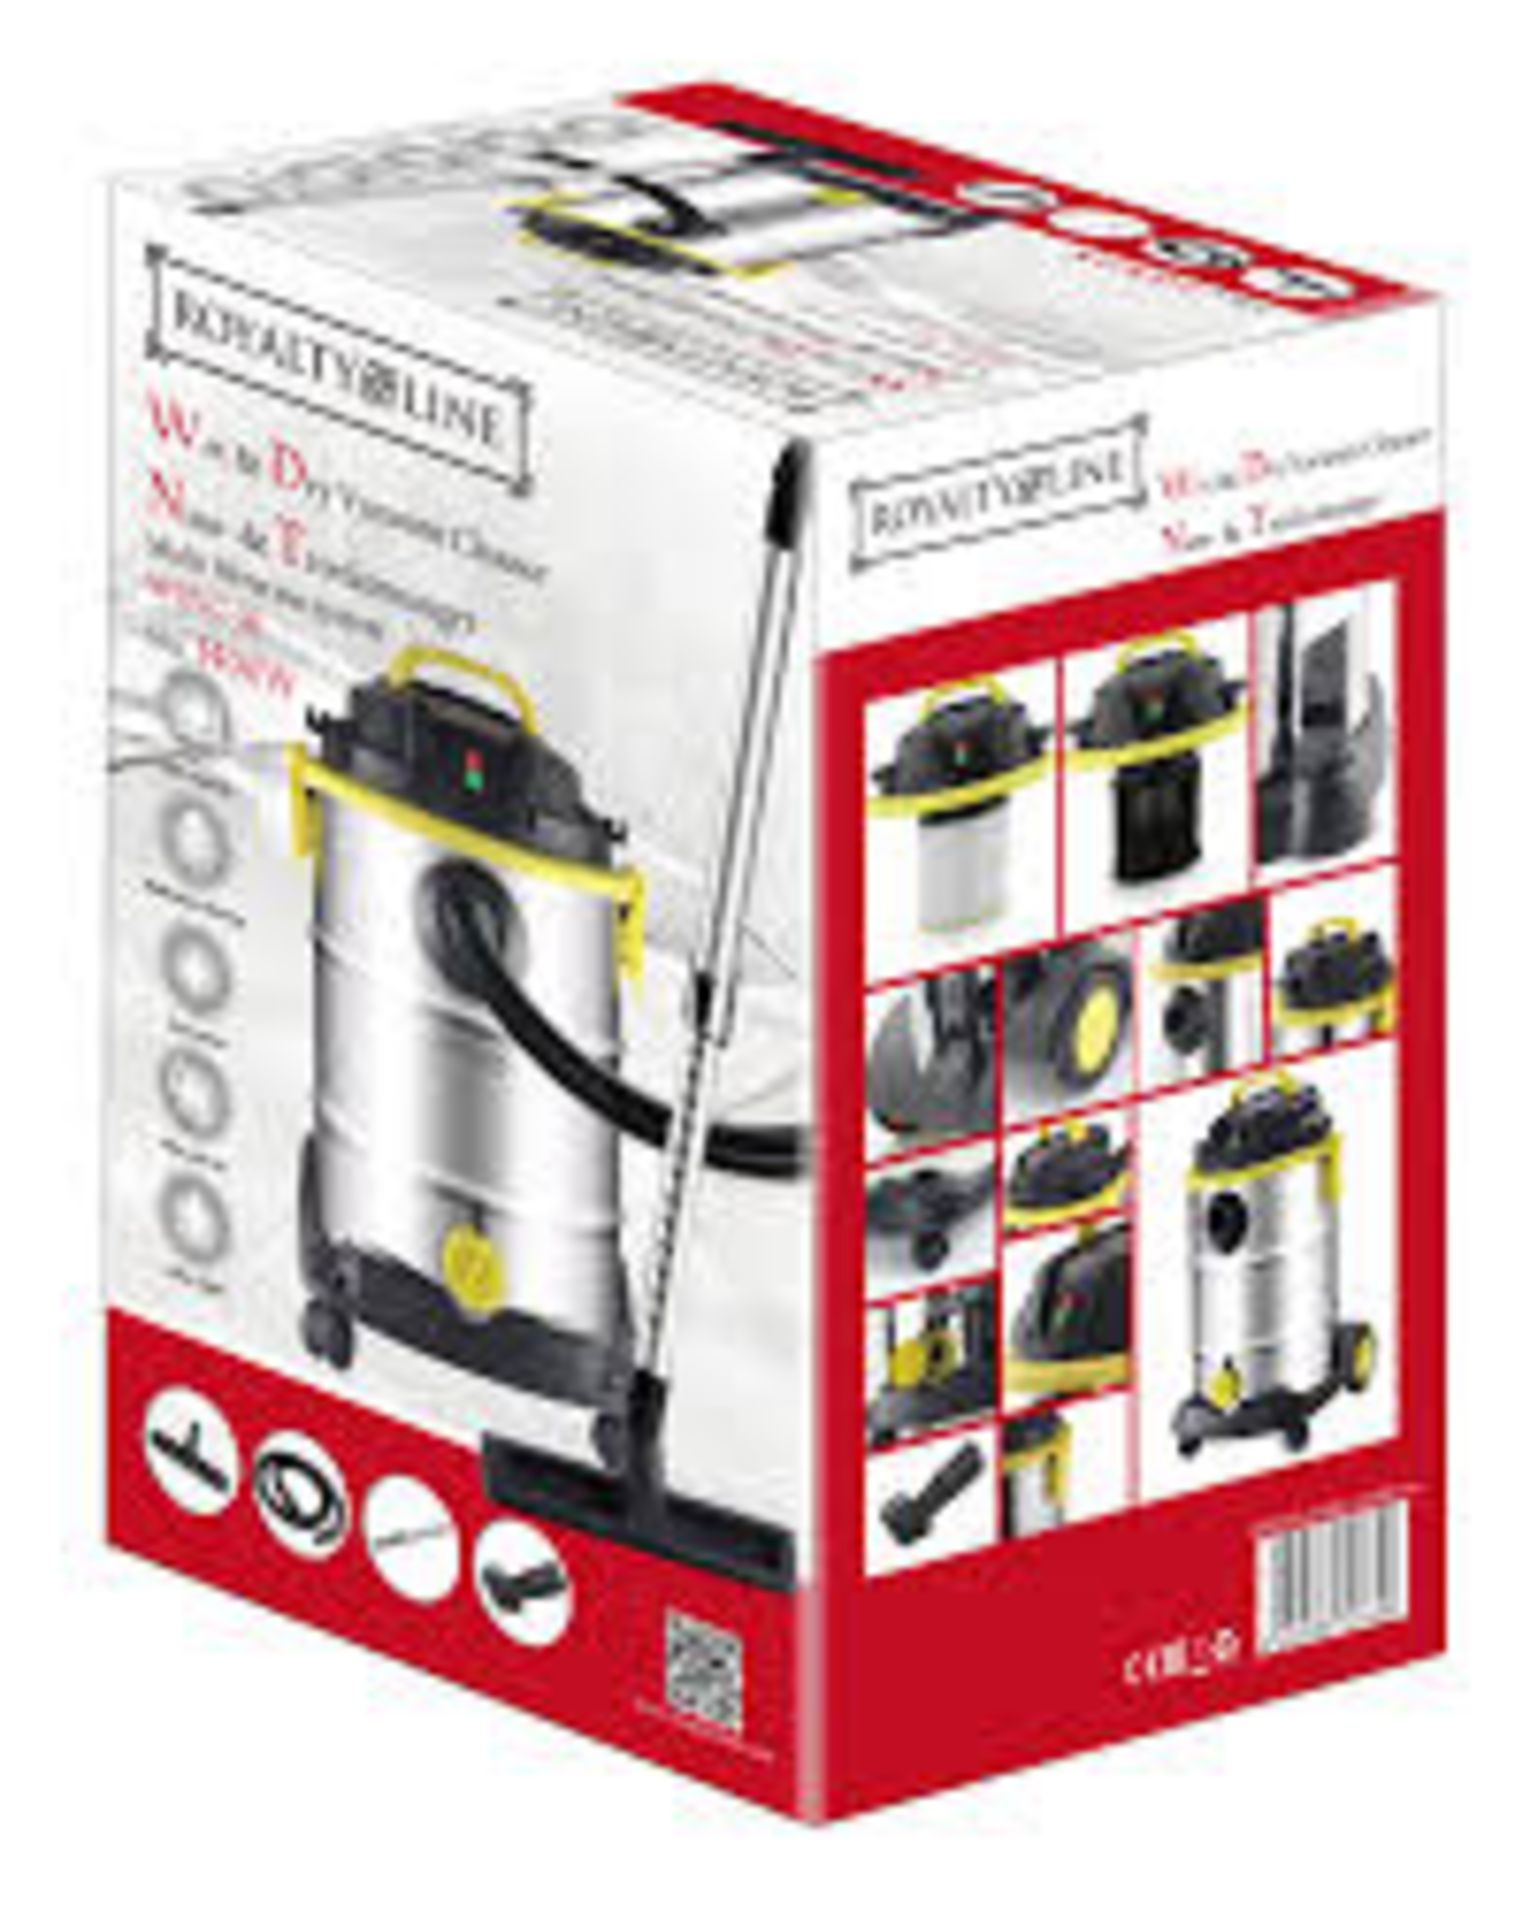 V Brand New Wet and Dry Vacuum Cleaner - 1400W - 25L Capacity - Multi Filtration System With Special - Image 2 of 2